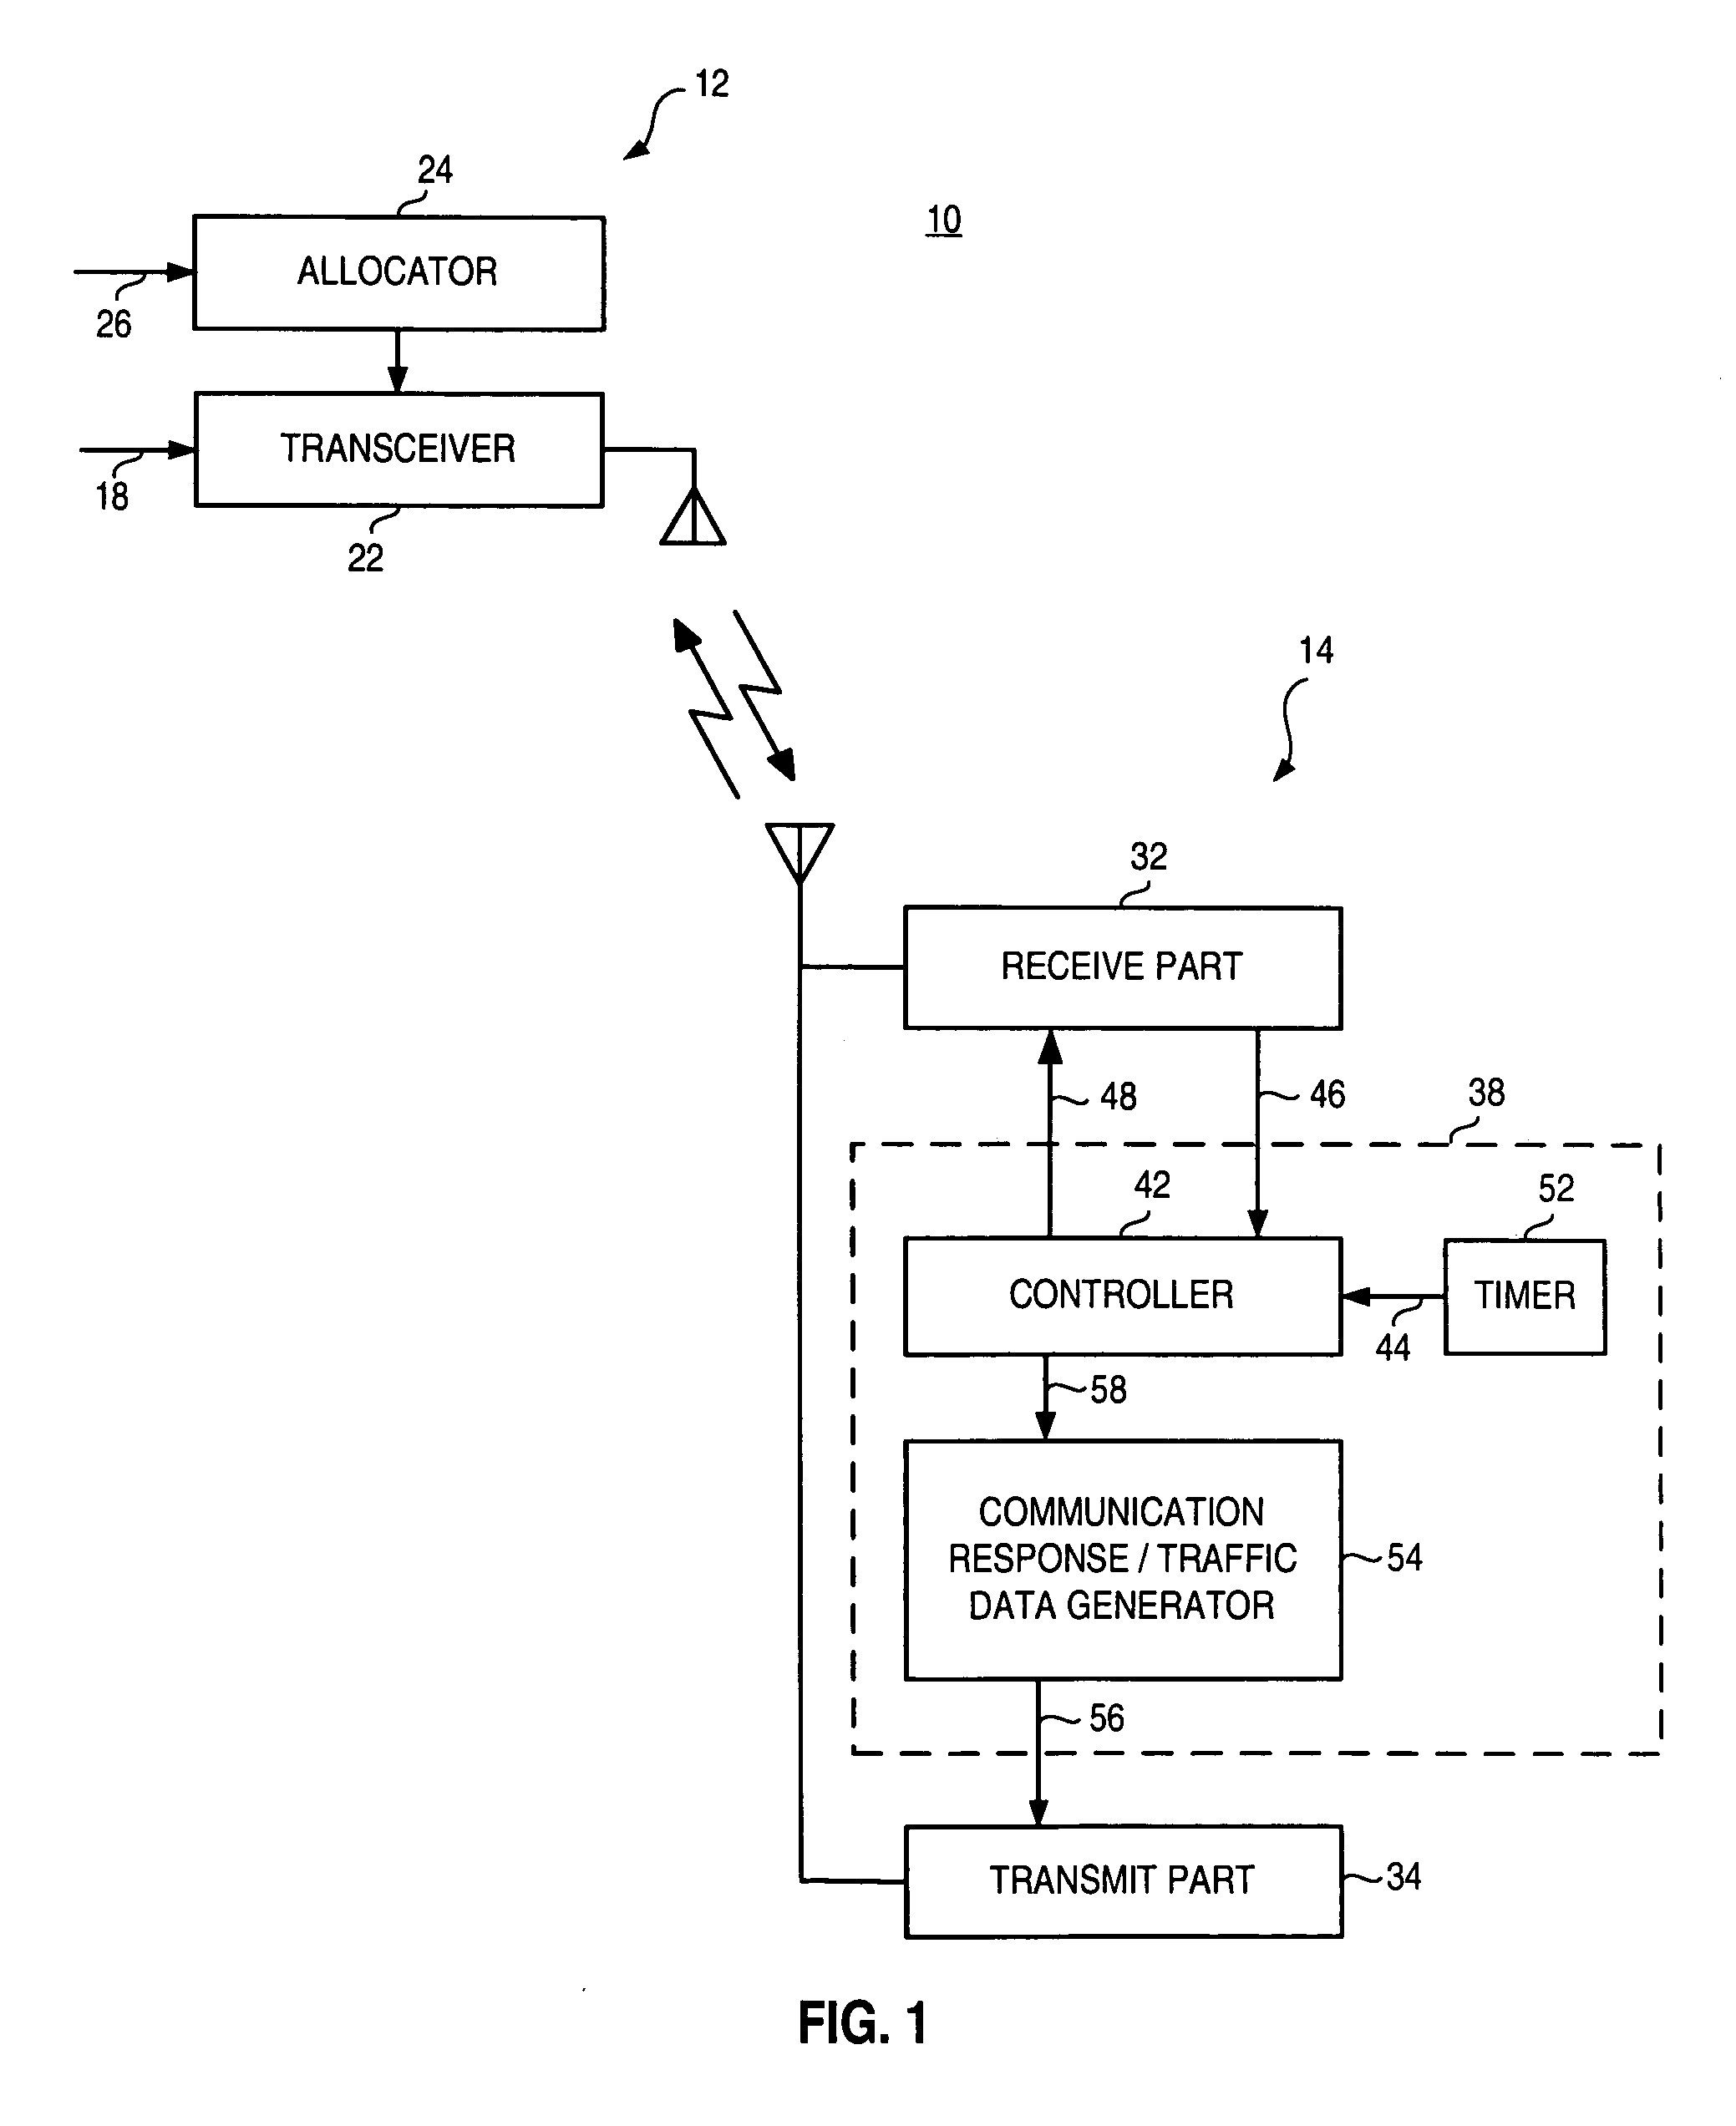 Method and apparatus for enabling transmission of communication response in a slotted radio data communication system